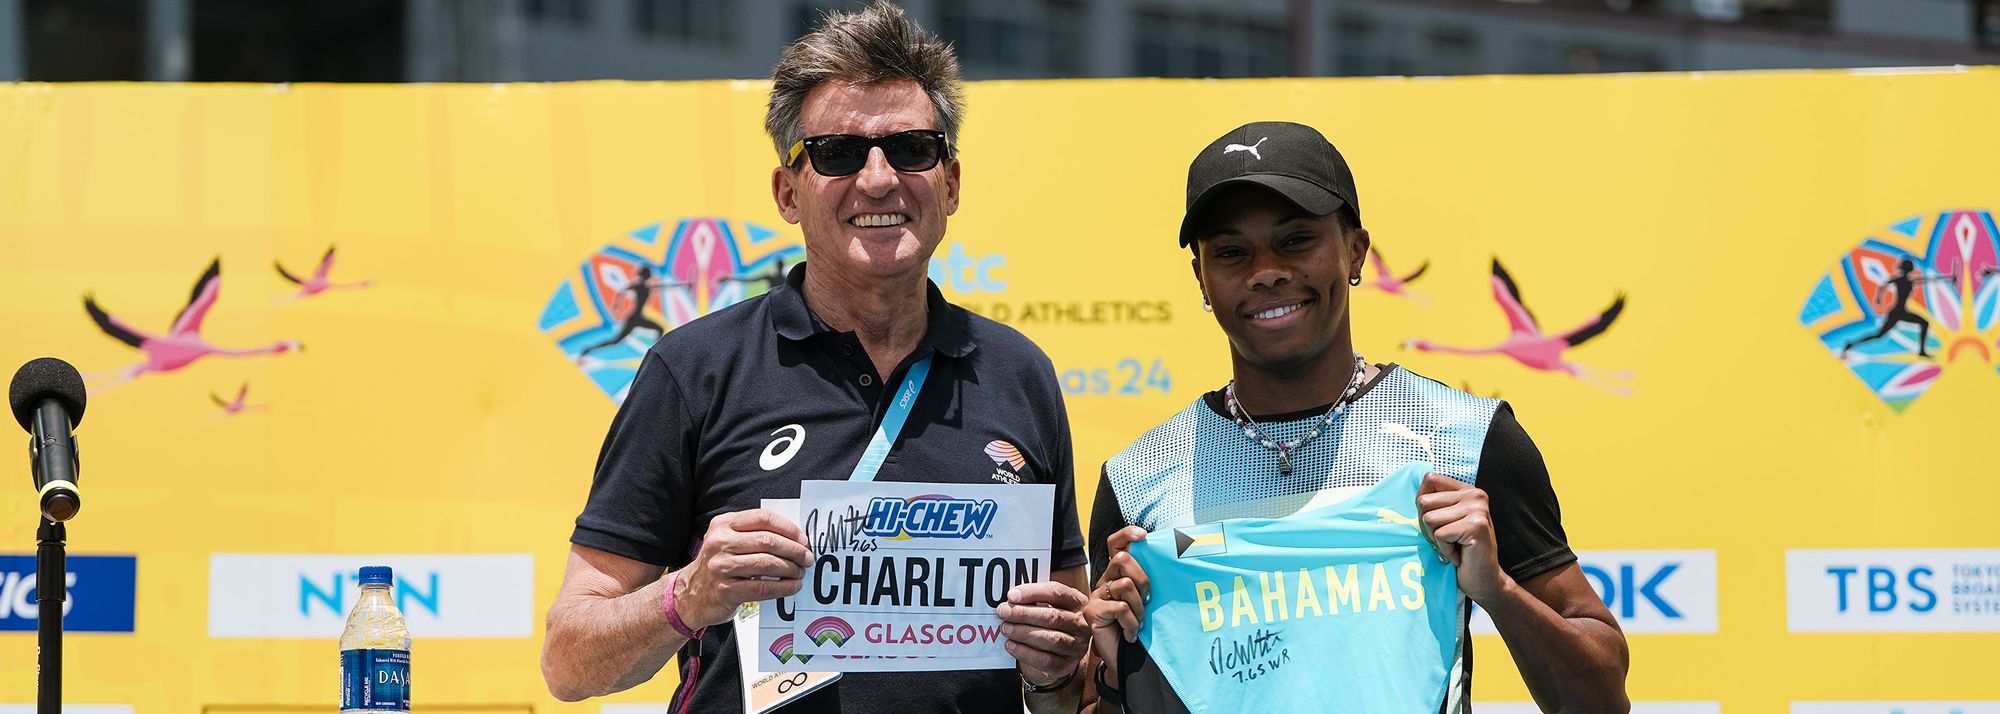 To mark the World Athletics Relays Bahamas 24, Devynne Charlton has donated to the Museum of World Athletics her Bahamian team singlet and name bib from the World Athletics Indoor Championships in Glasgow